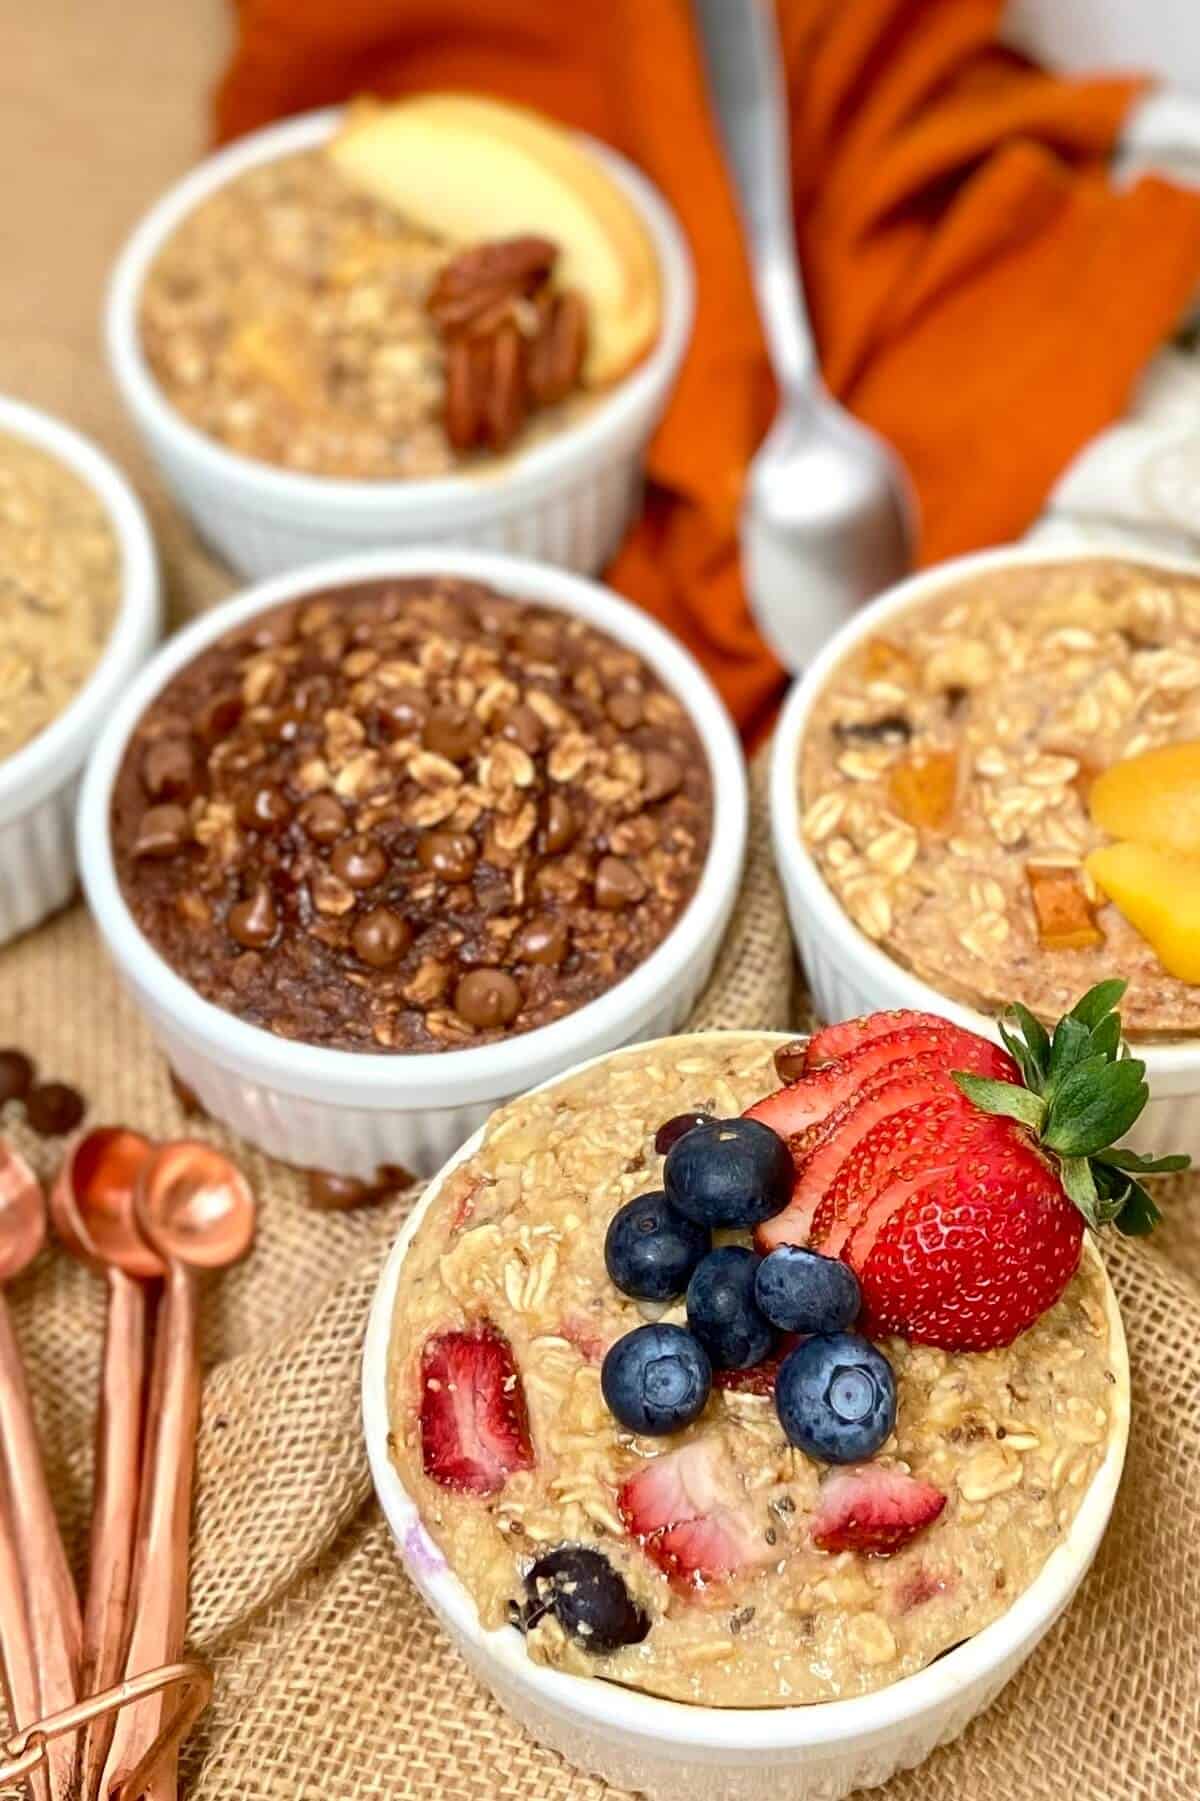 All different flavors of oatmeal on a burlap covered table.